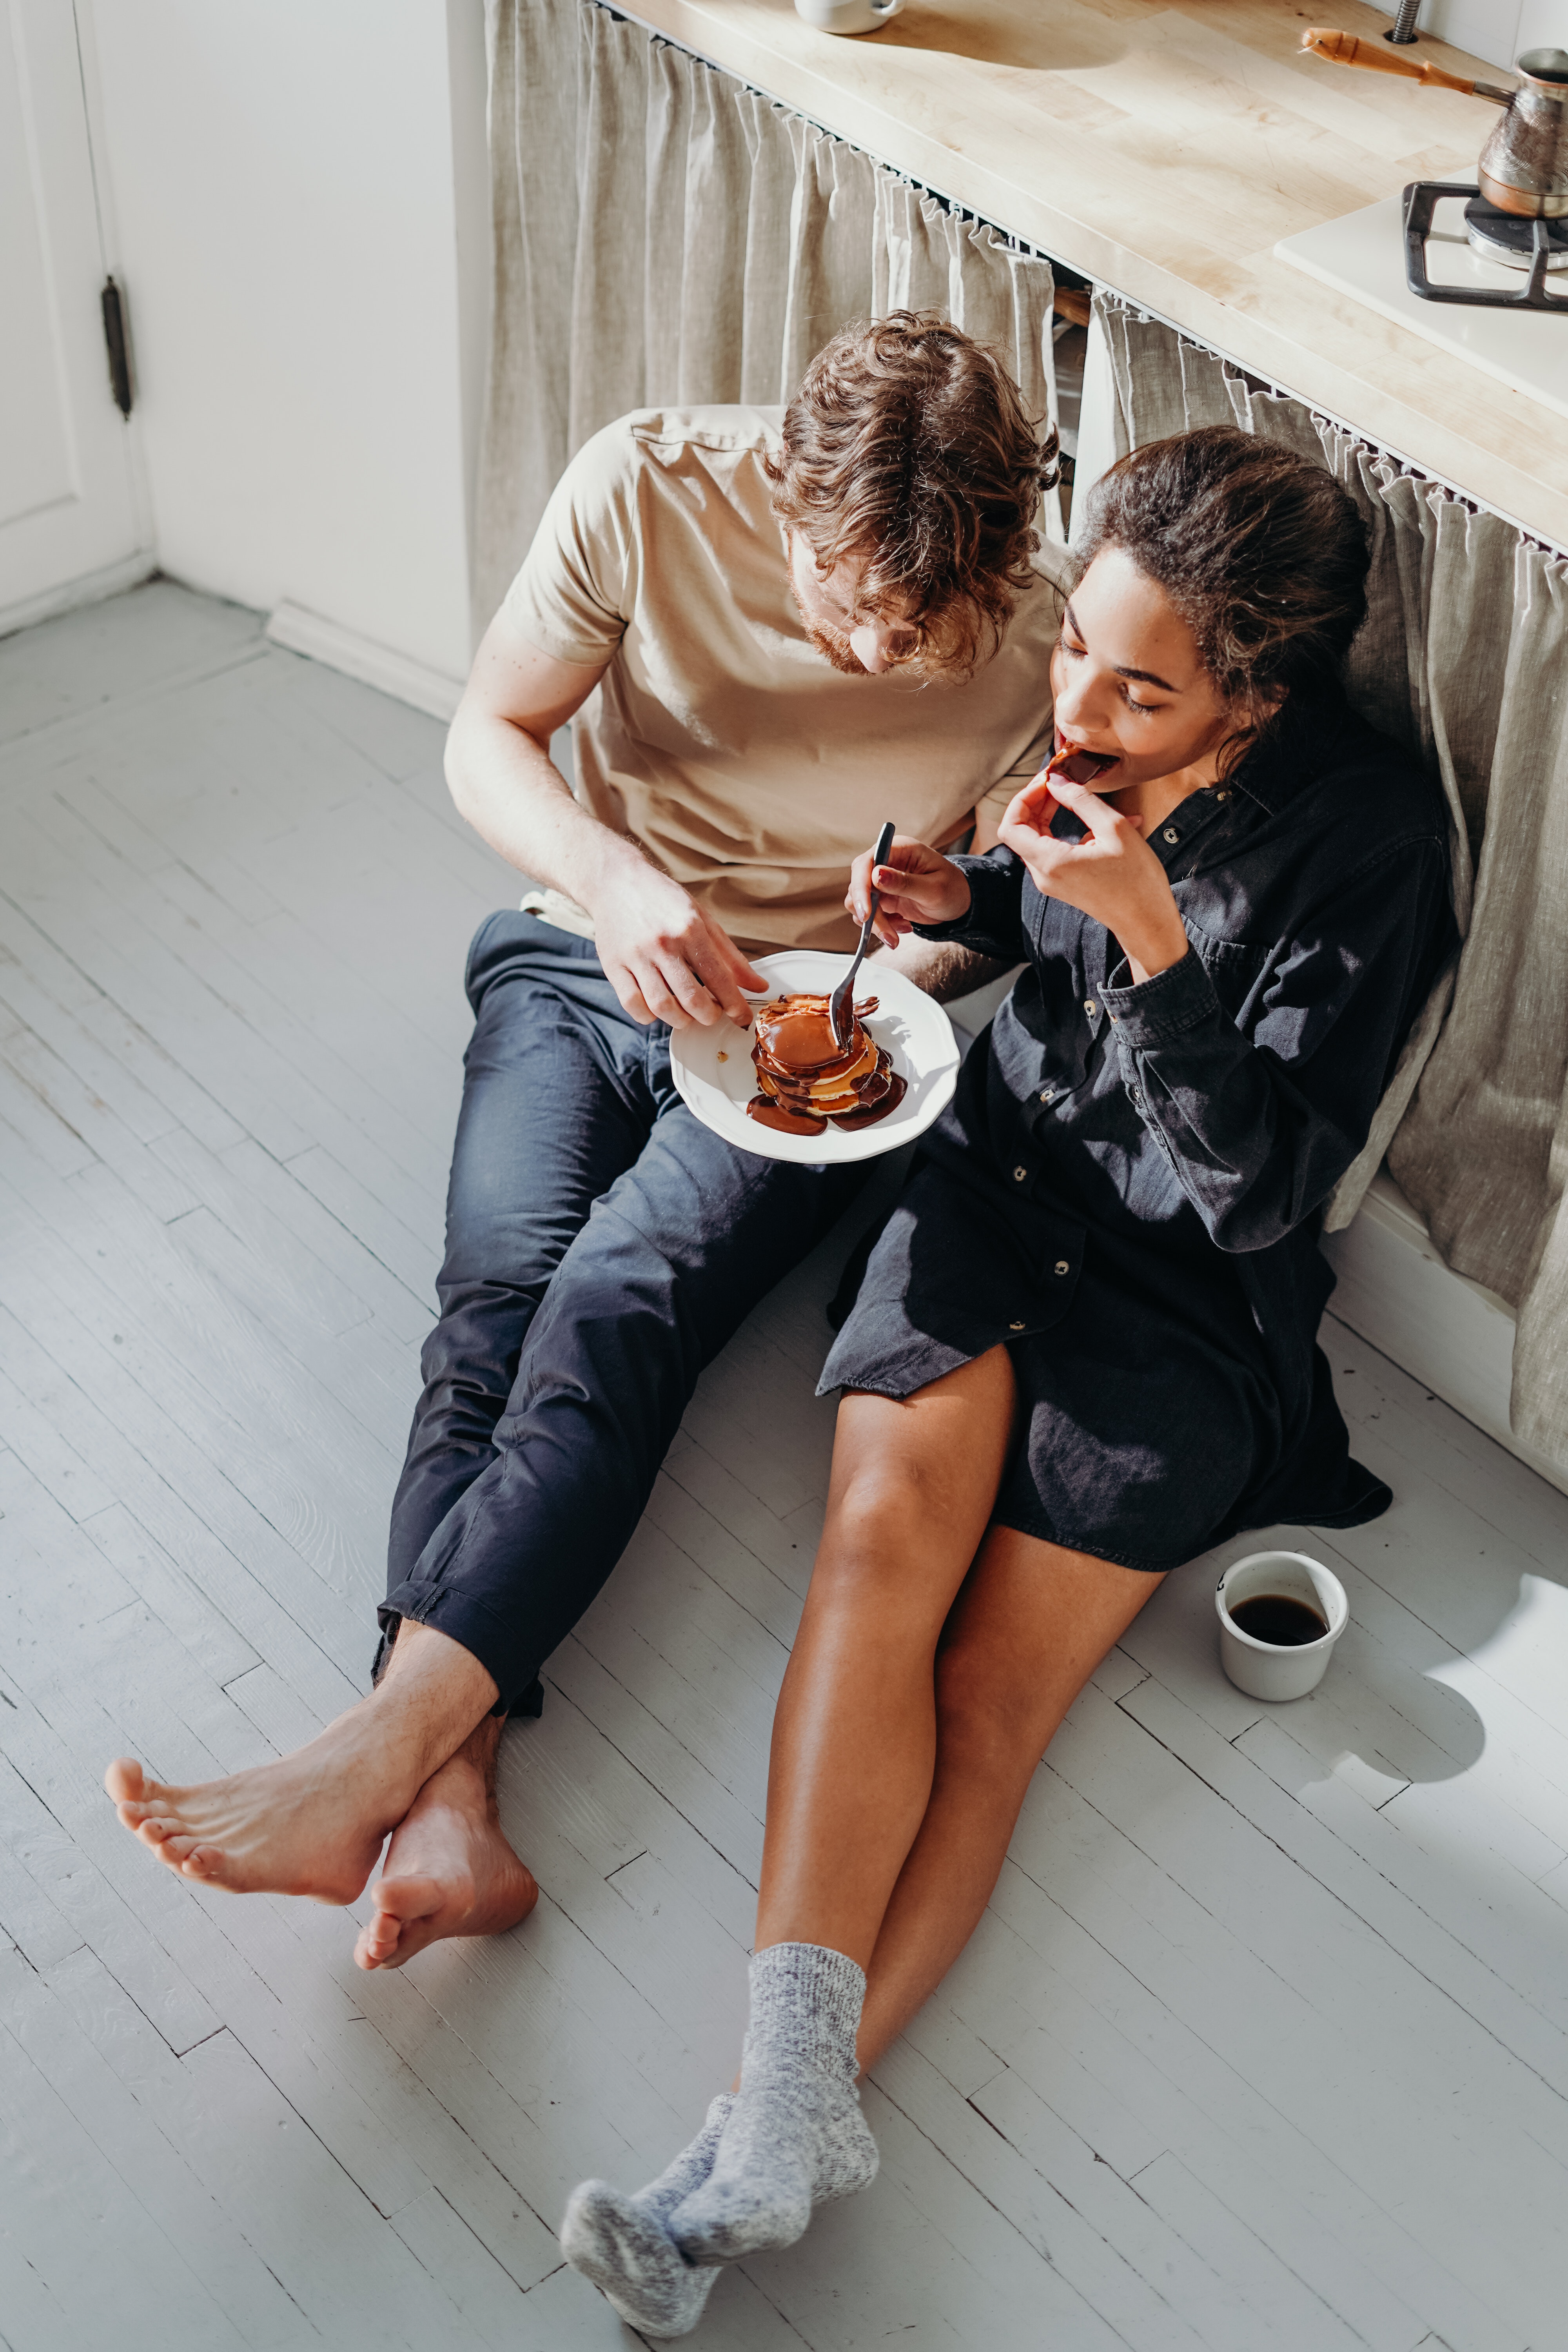 A couple eating pancakes while sitting on the floor. | Source: Pexels